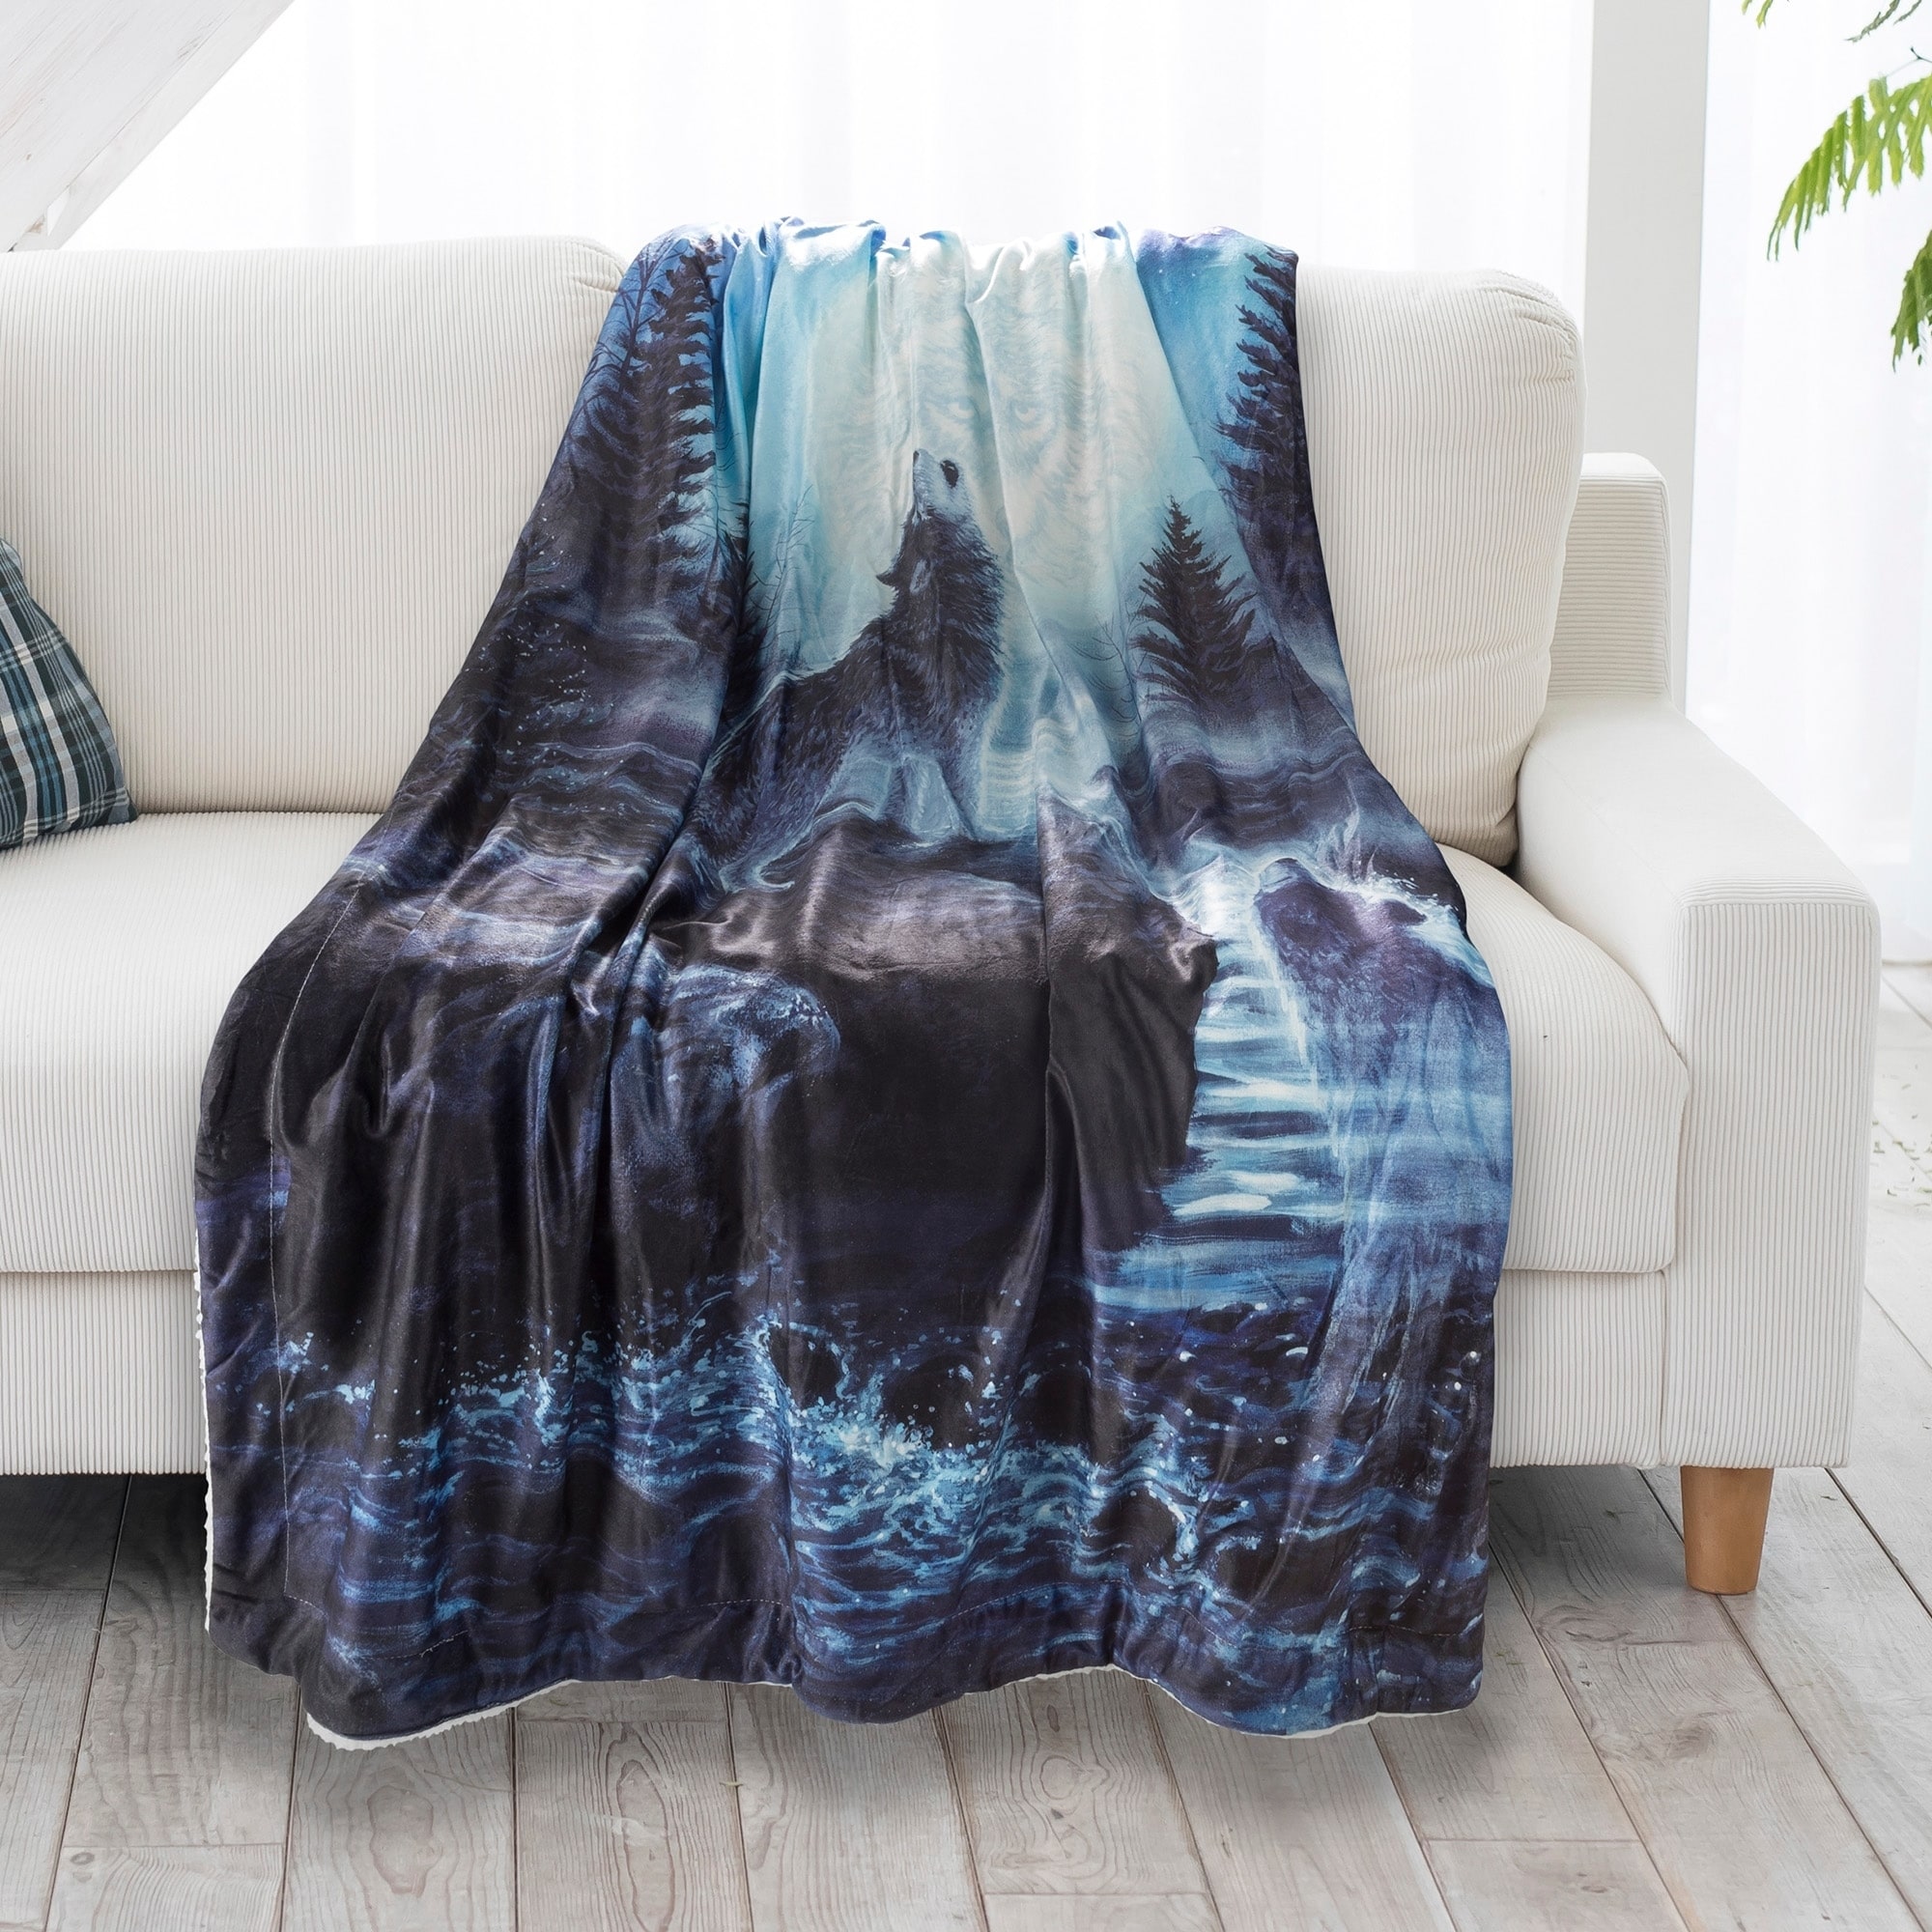 Home/Travel/Camping Applicable Moslion Soft Cozy Throw Blanket Howl Wolf in The Morning Mist Fuzzy Couch/Bed Blanket for Adult/Youth Polyester 30 X 40 Inches 